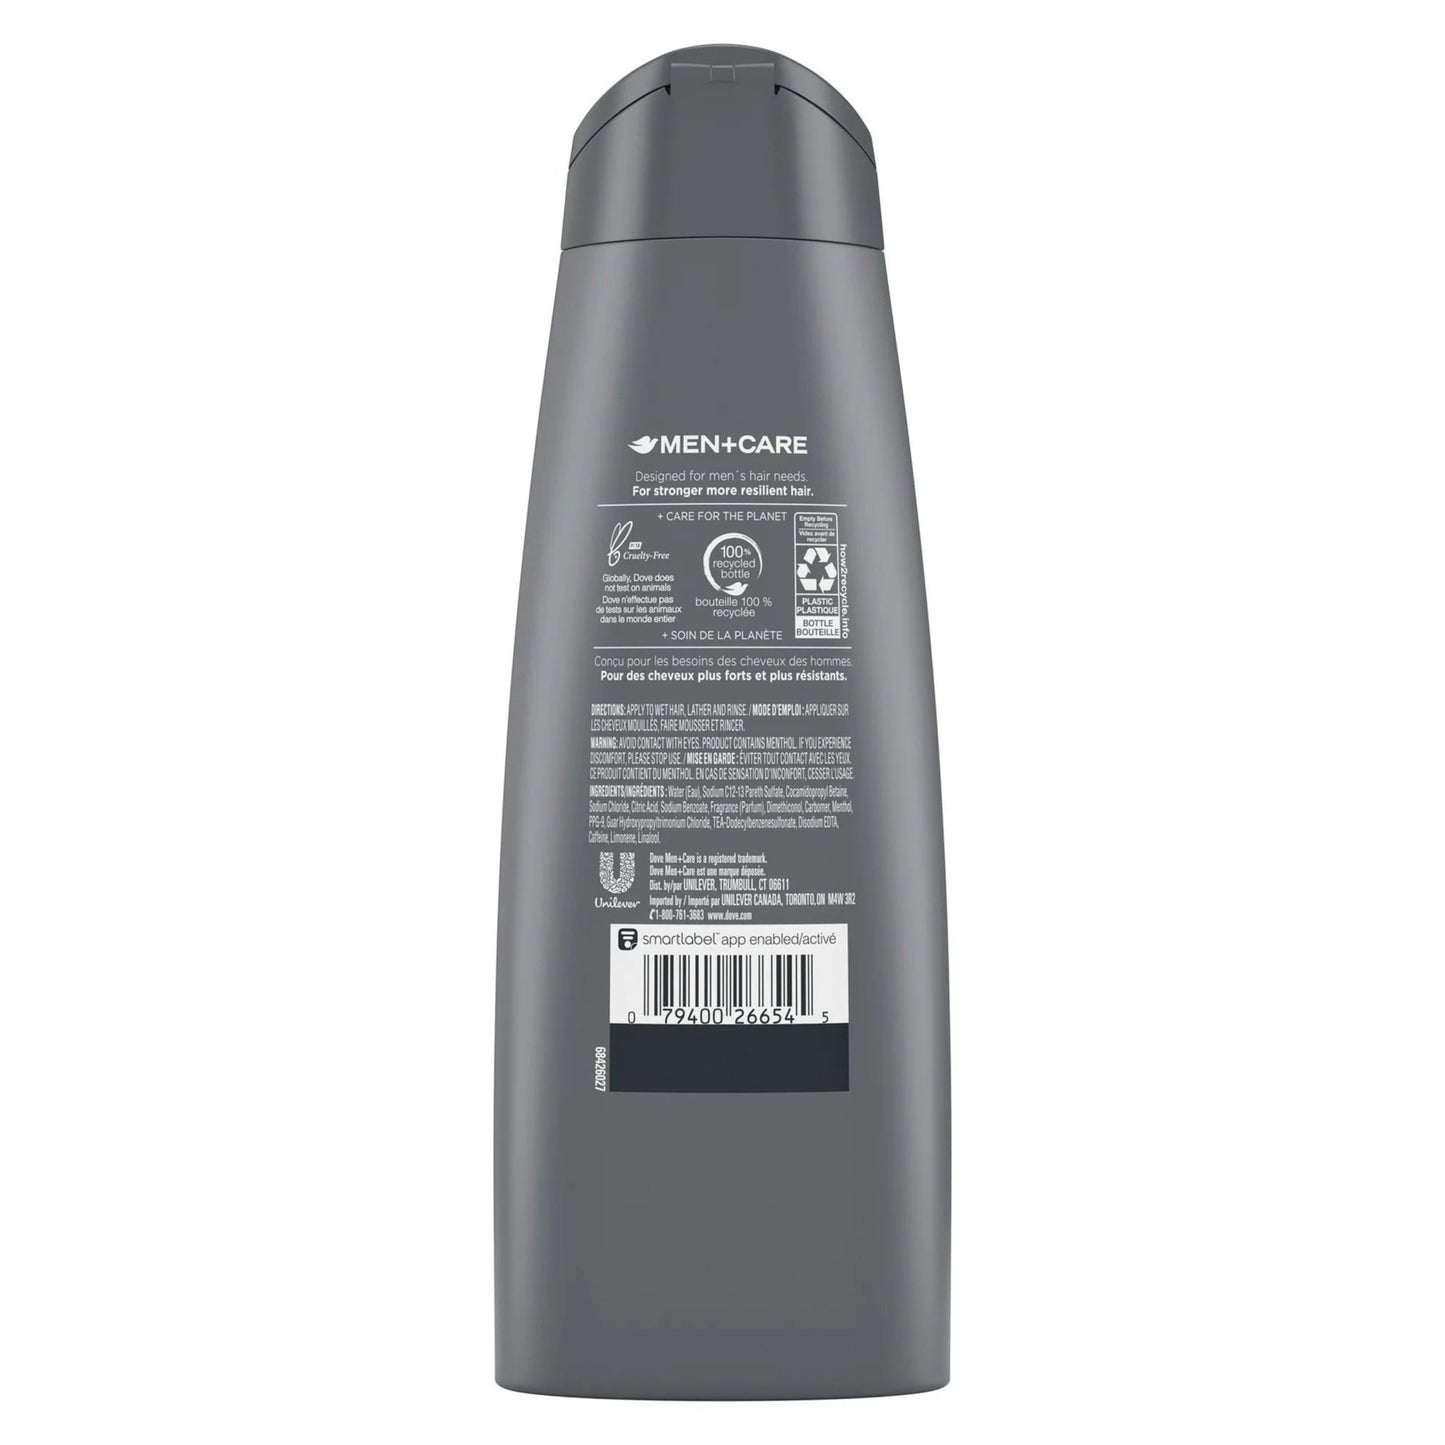 Dove Men+Care Fresh and Clean 2-in-1 Shampoo and Conditioner(355mL)